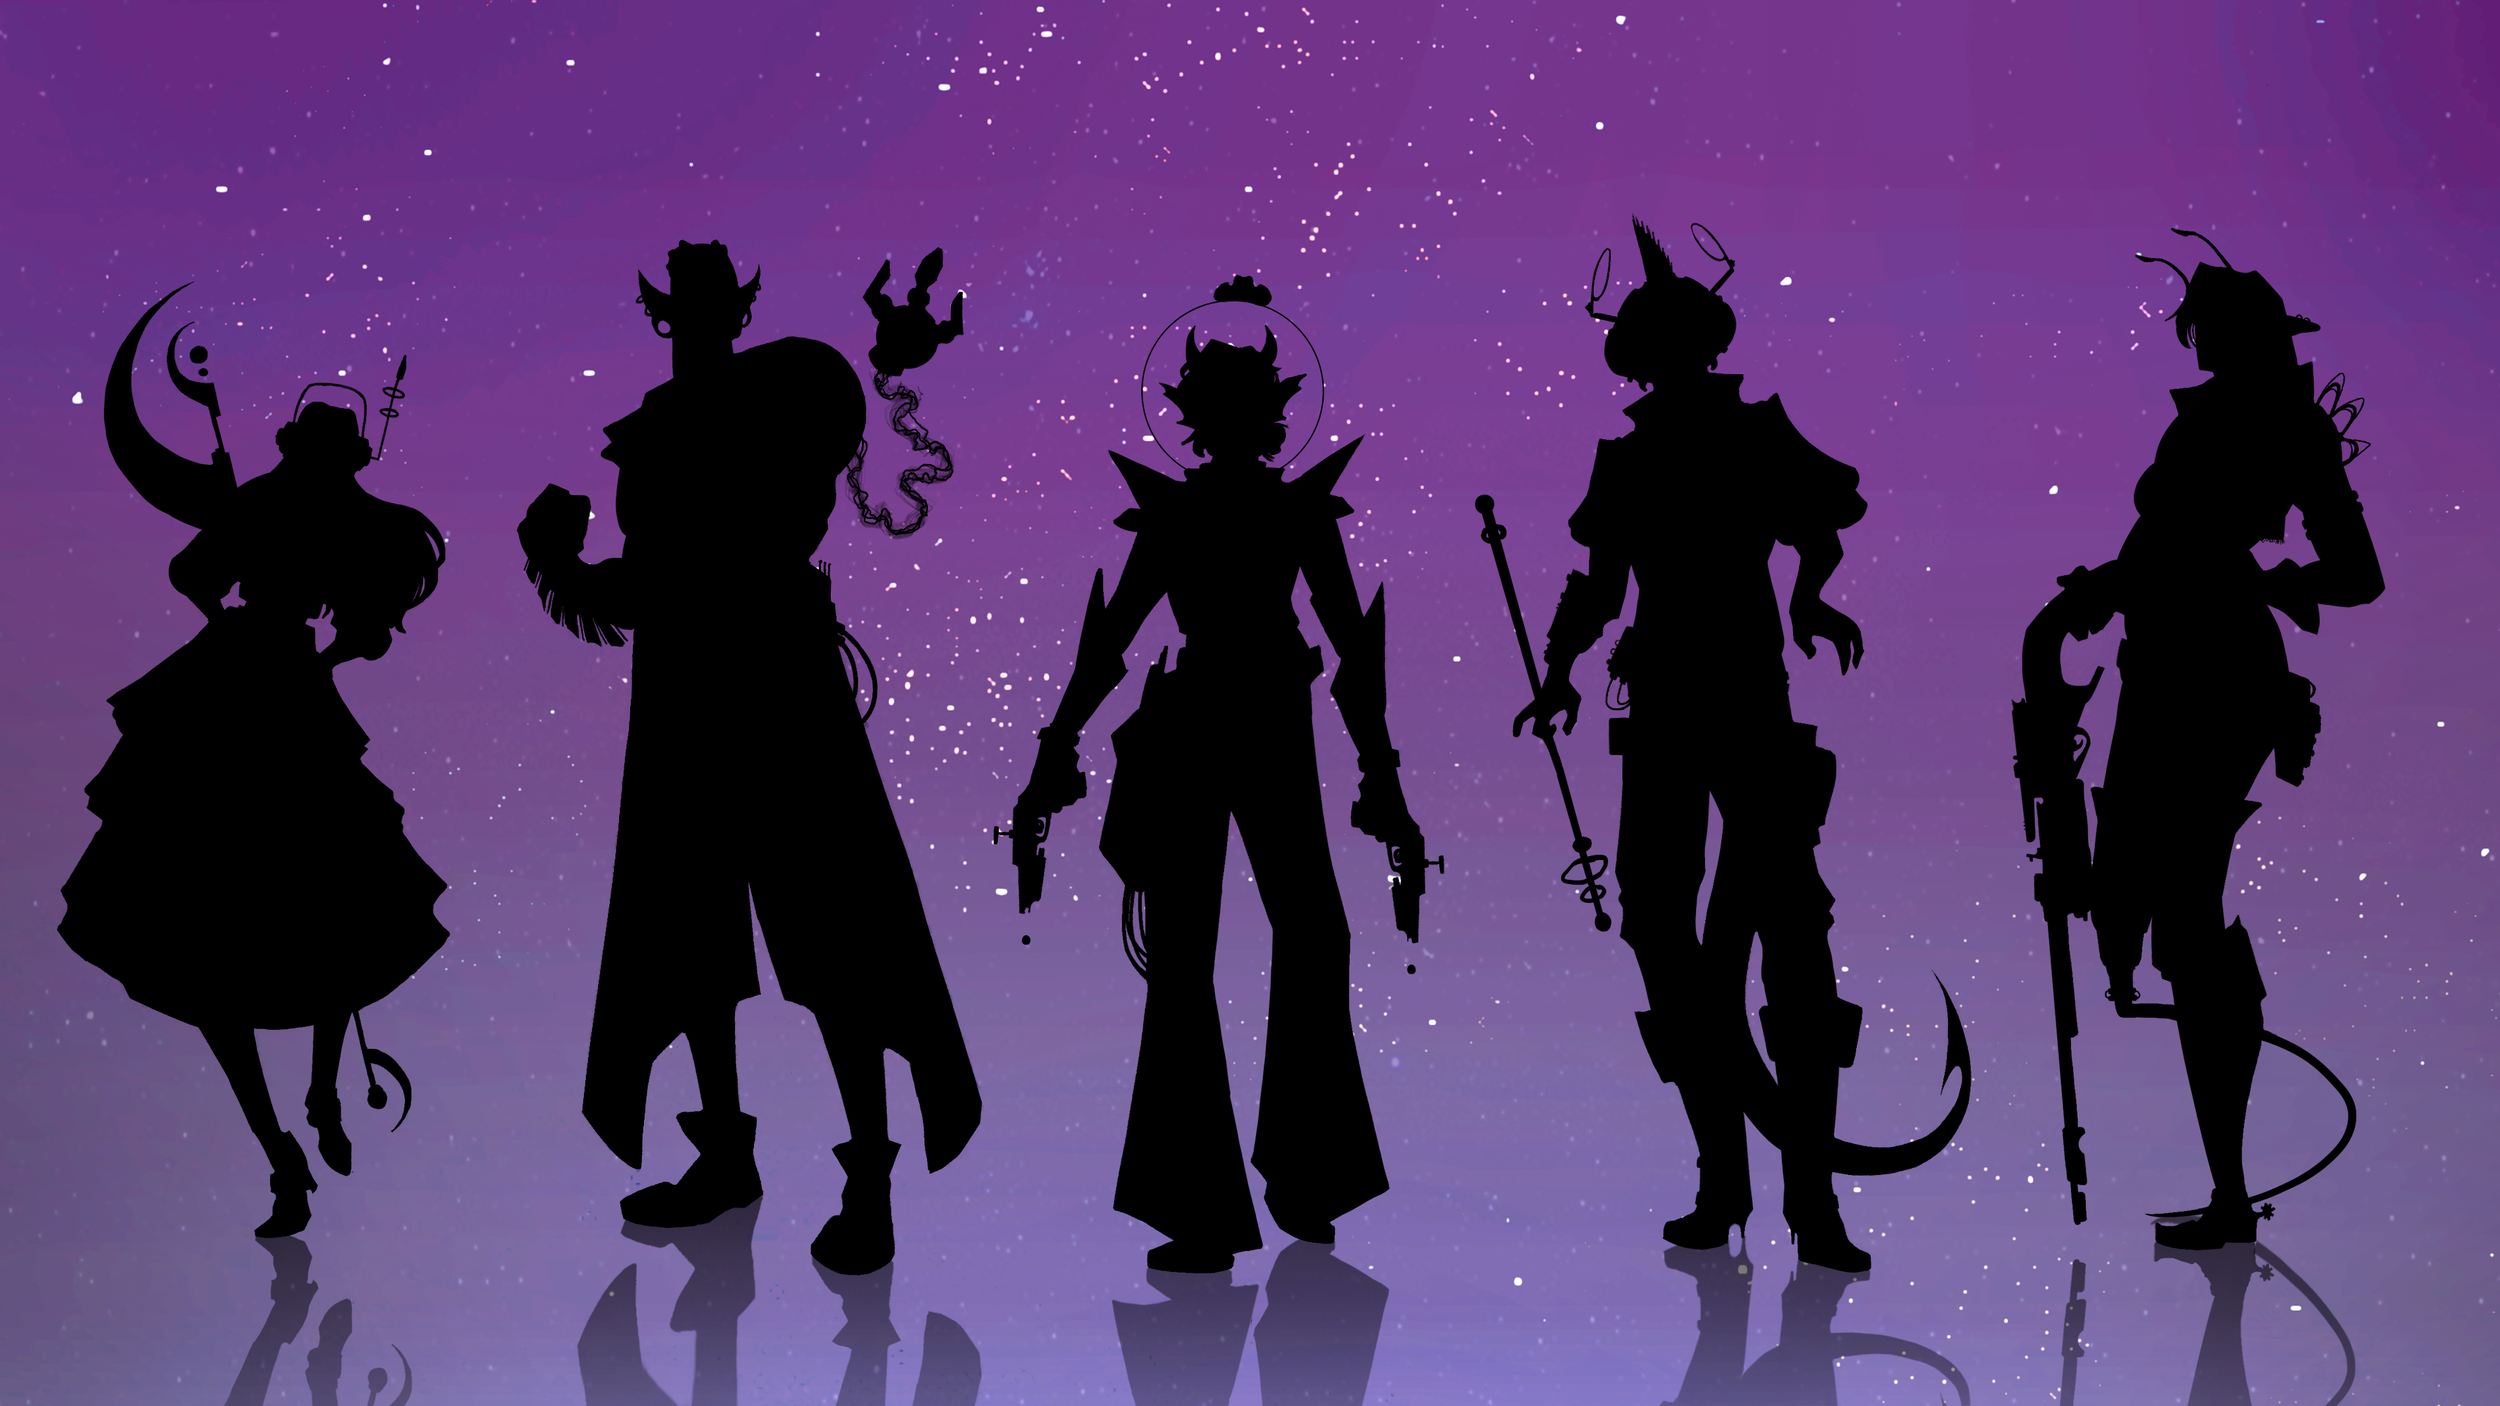 Additional Silhouette Exploration